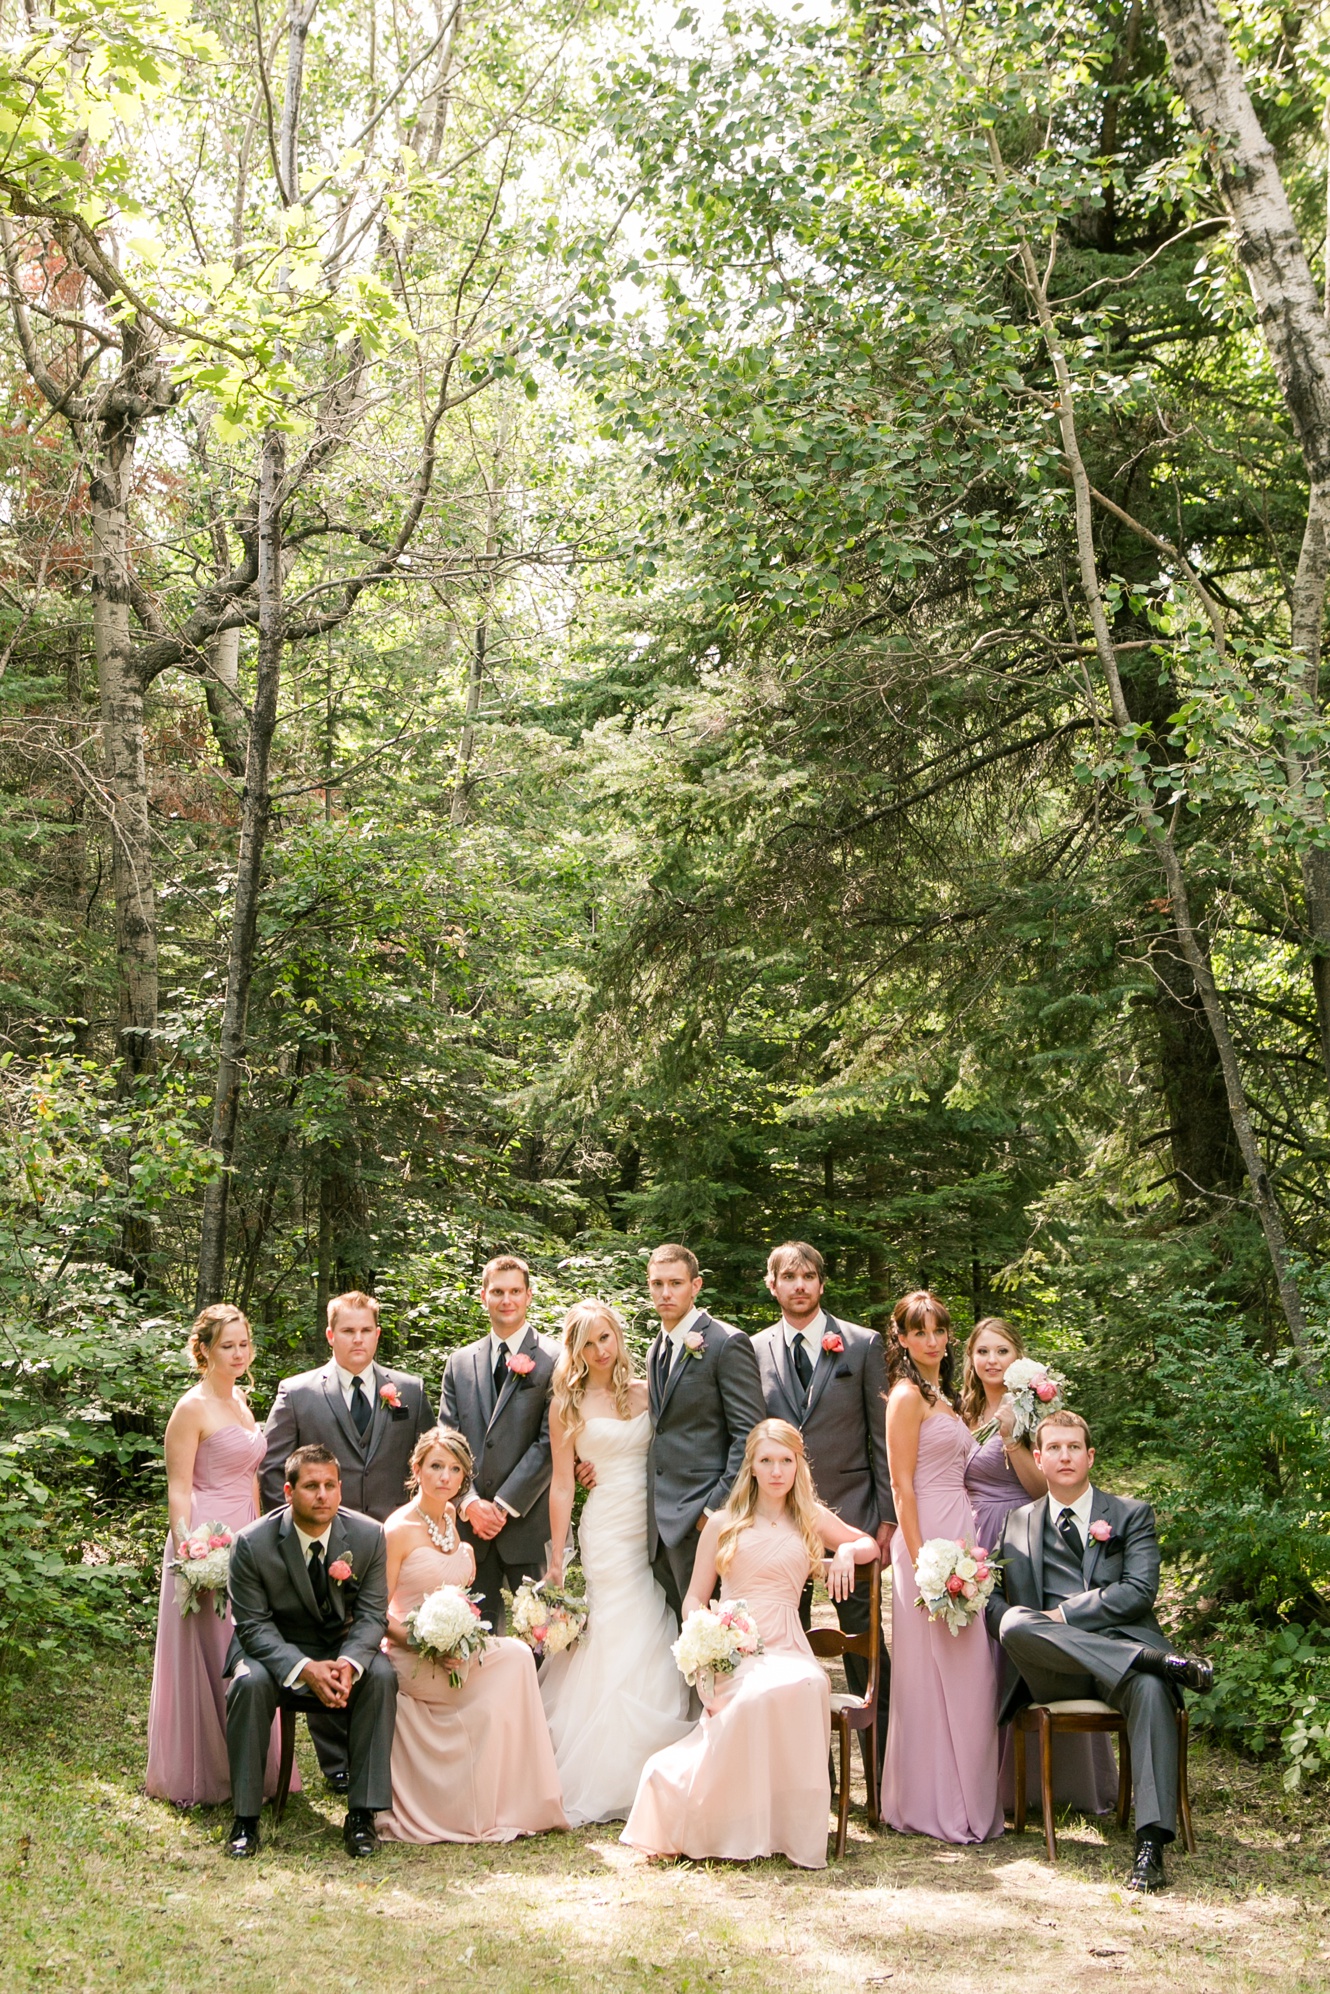 Bridal party photos in pastels and grey photo